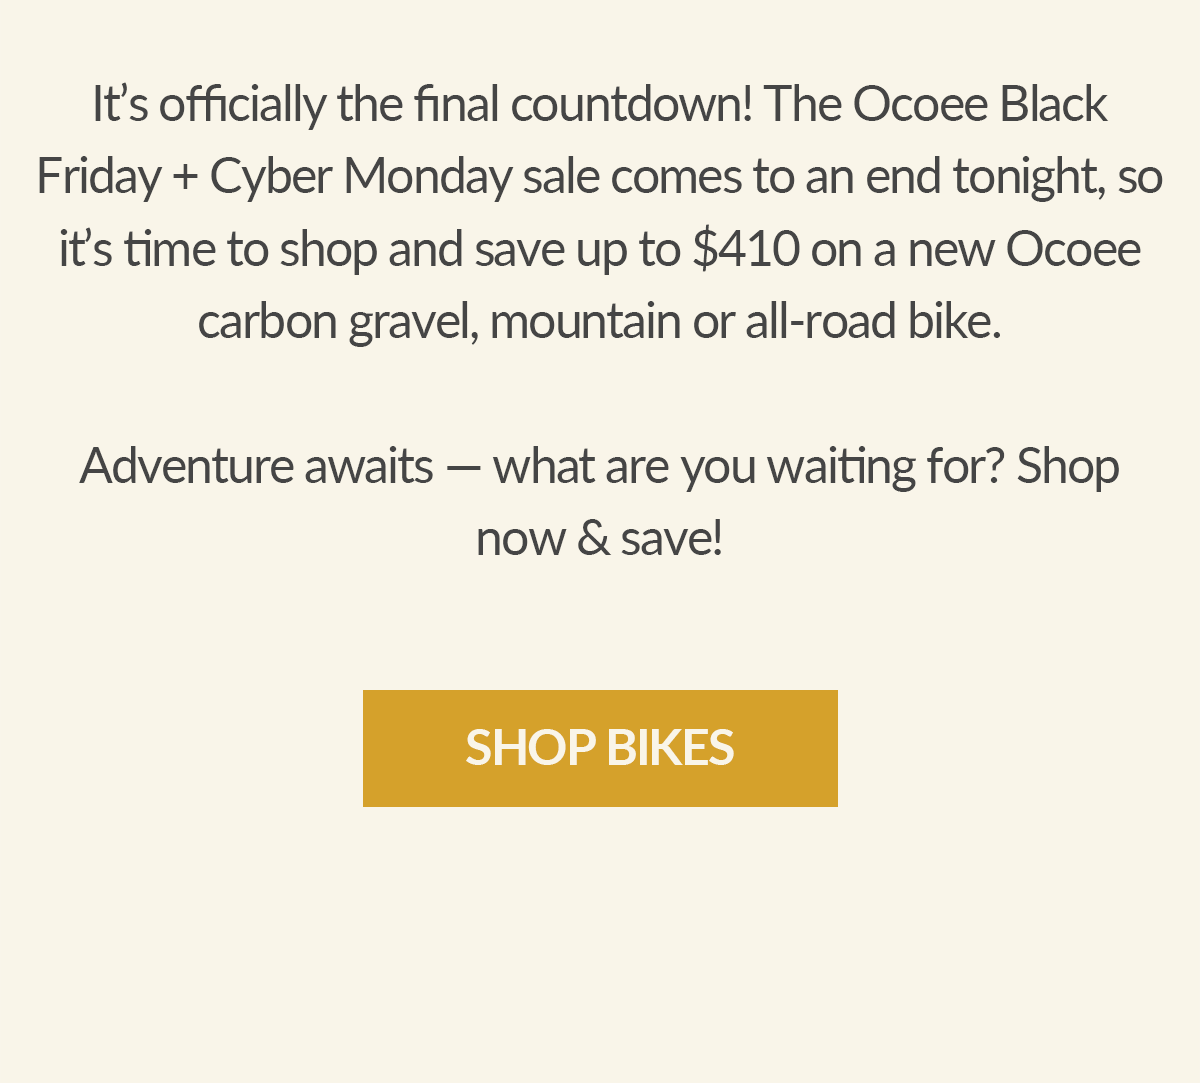 This year's Black Friday + Cyber Monday sales are coming to an end, so it's your final chance to shop and save up to $410 on a new Ocoee bike!